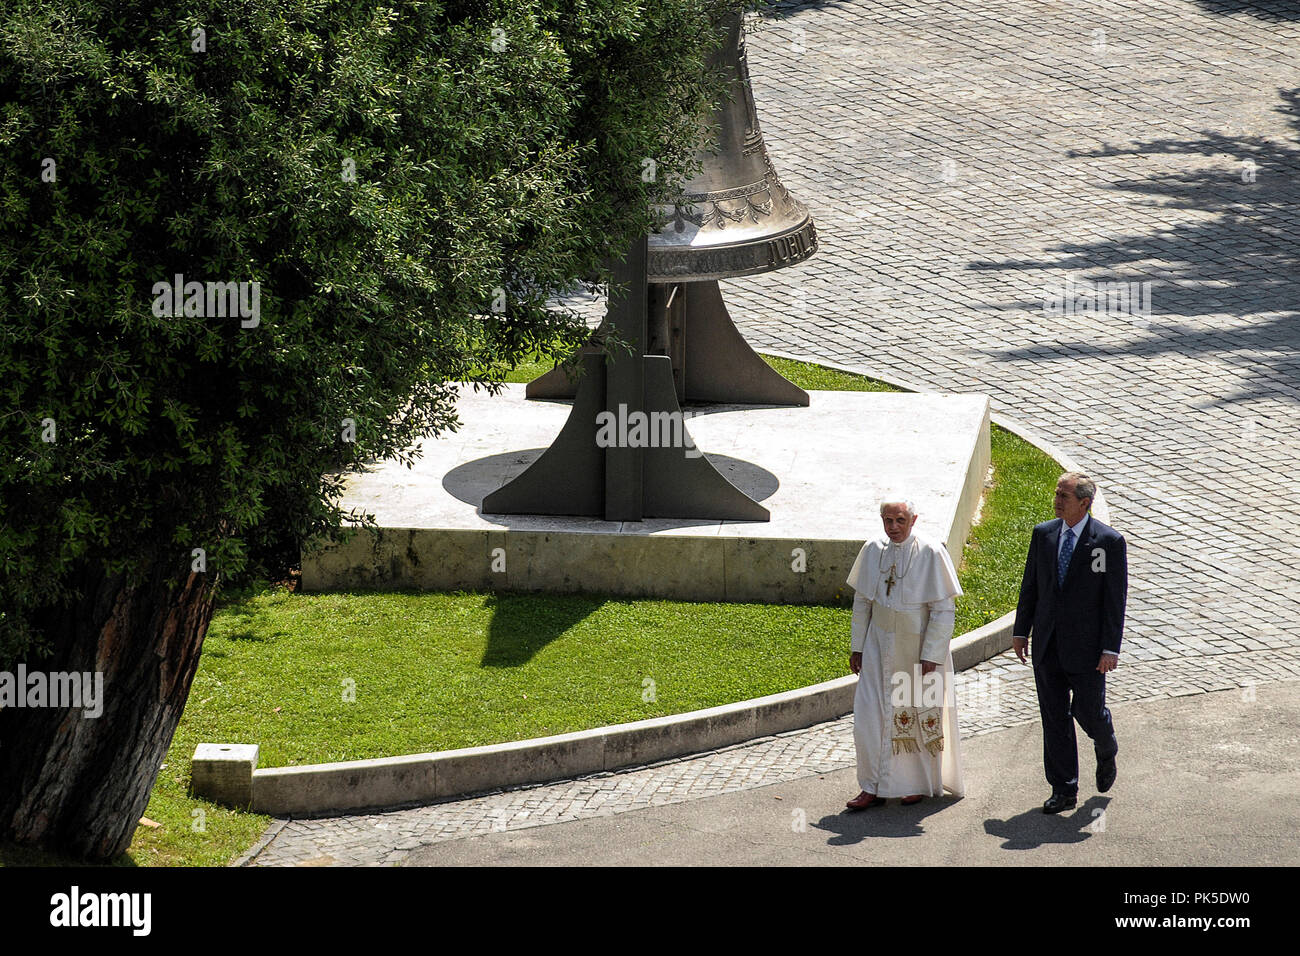 Benedict XVI meet George W.Bush  Vatican City, Vatican Gardens 13 06 2008.Sua Holiness' Pope Benedict XVI received in audience with U.S. President George W. Bush, for the first time in the unique setting of the Tower of St. John in the Vatican Gardens. pictured from left: the Pres Bush, the Holy Father, before the copy of the Lourdes Grotto. Stock Photo